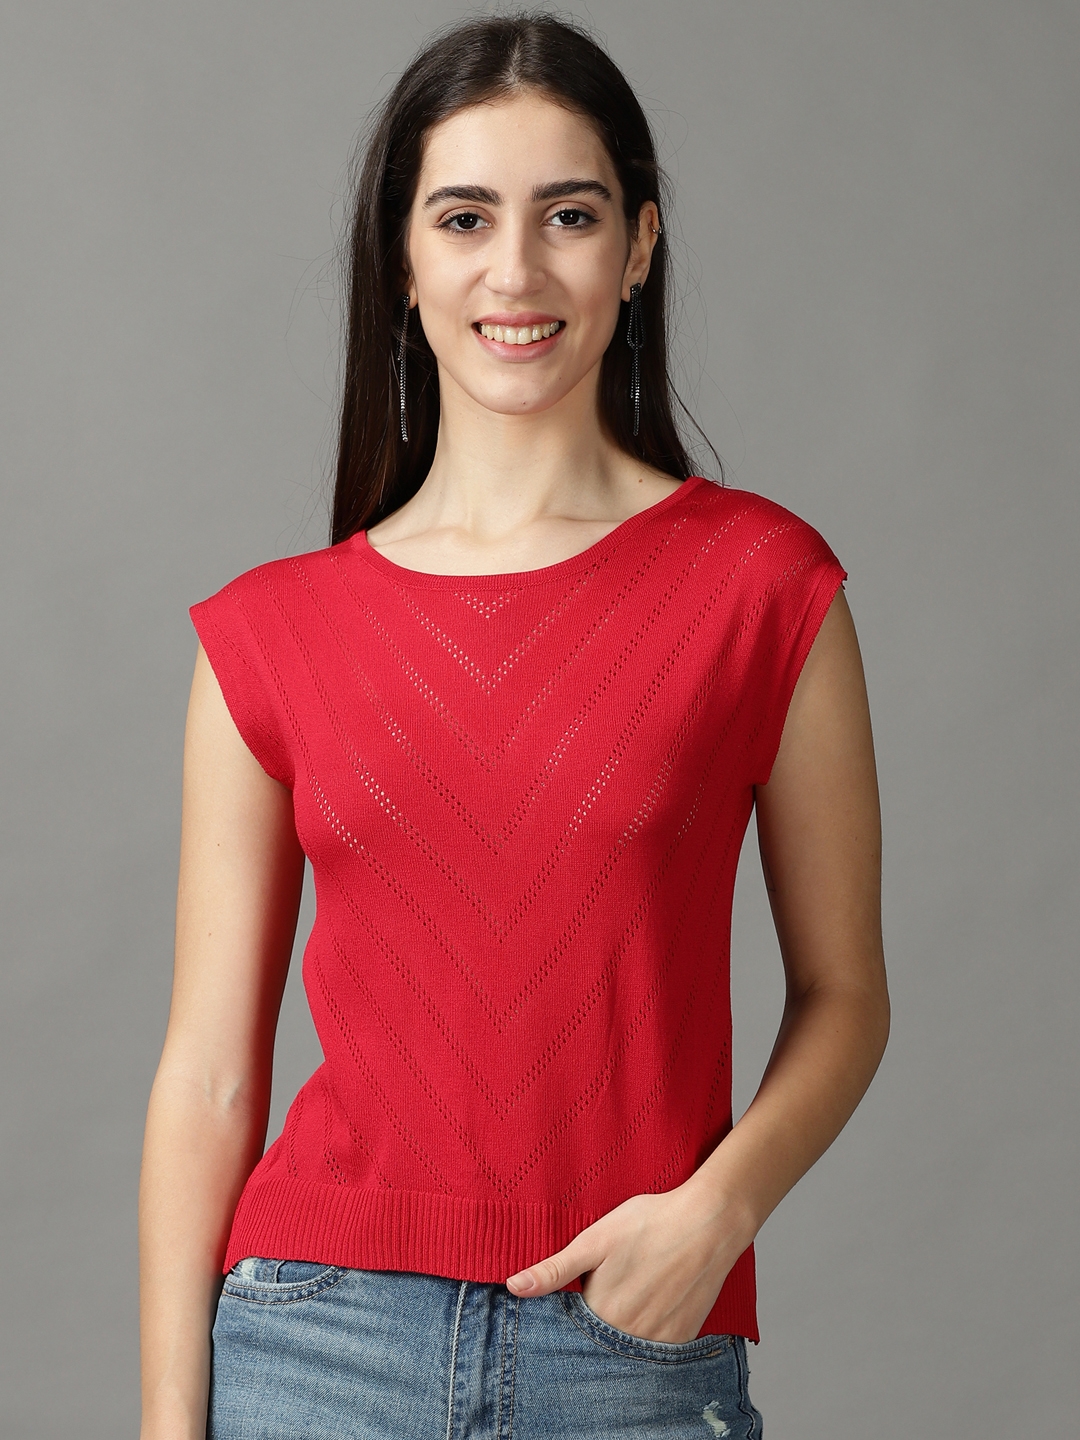 Women's Red Acrylic Solid Tops